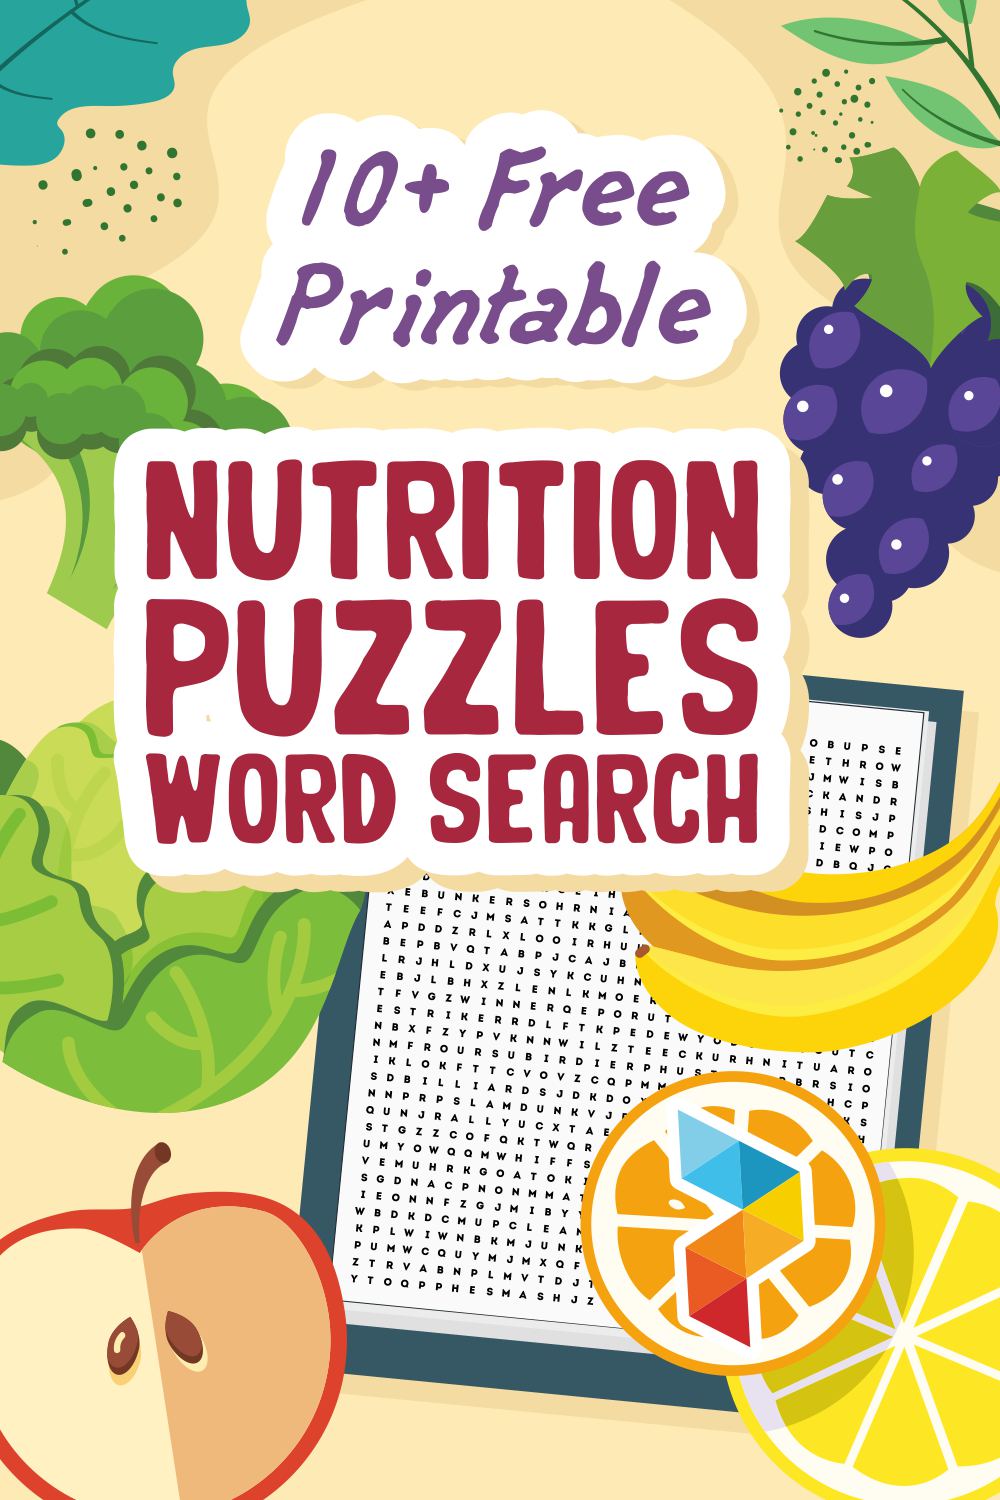 Nutrition Puzzles Word Search